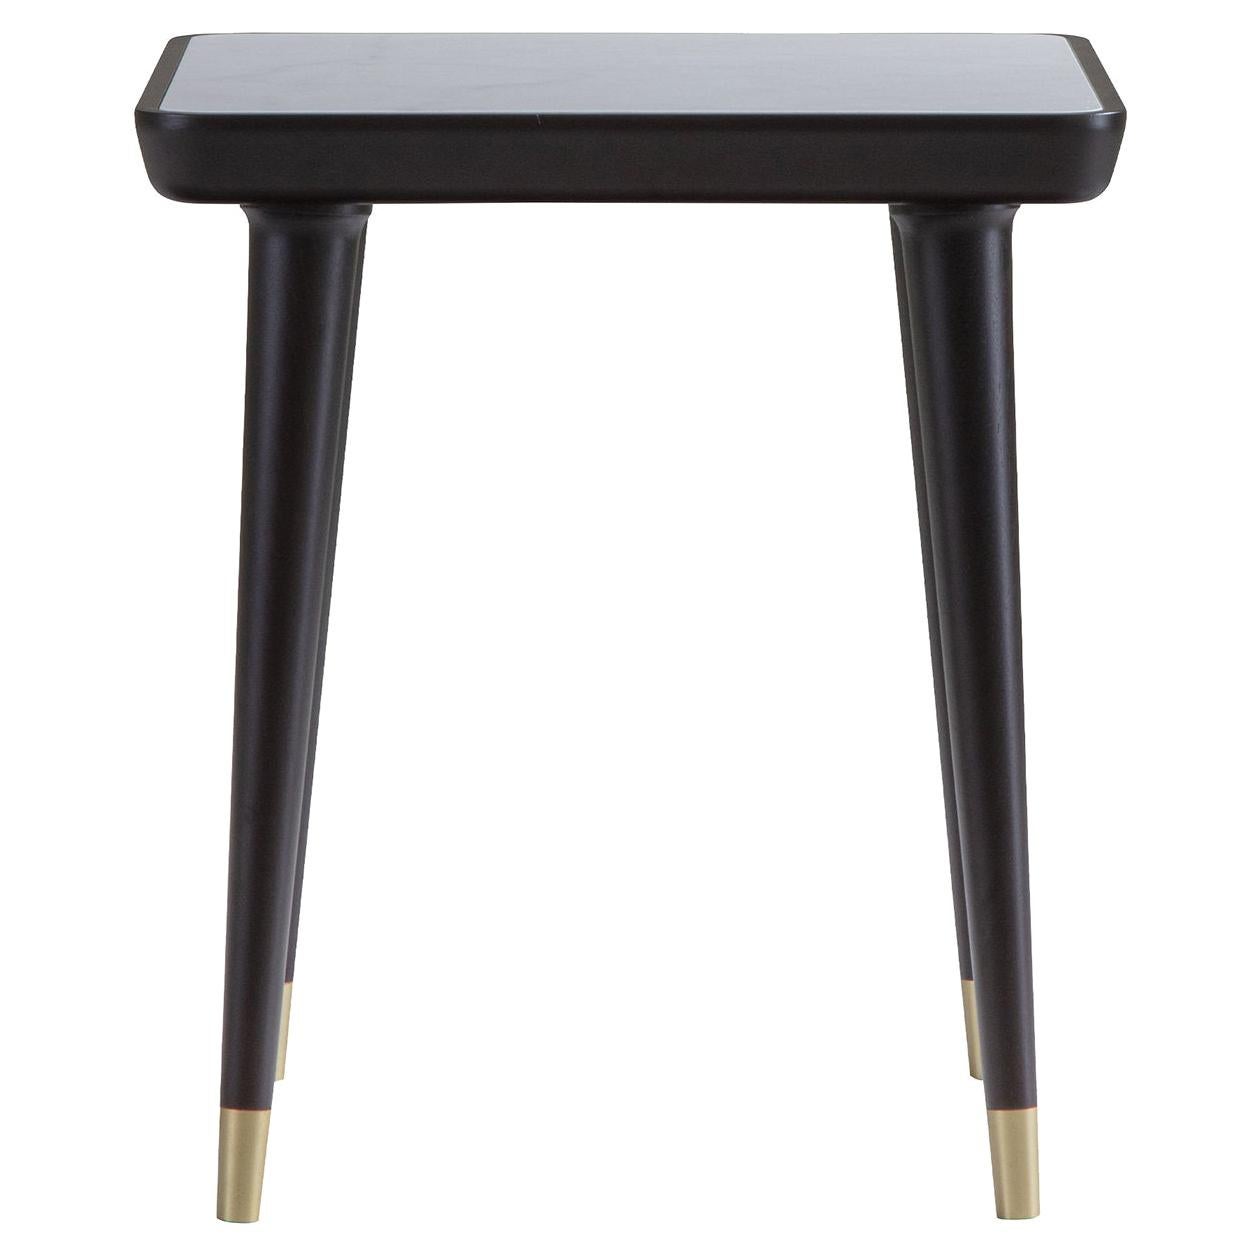 Petro Square Side Table